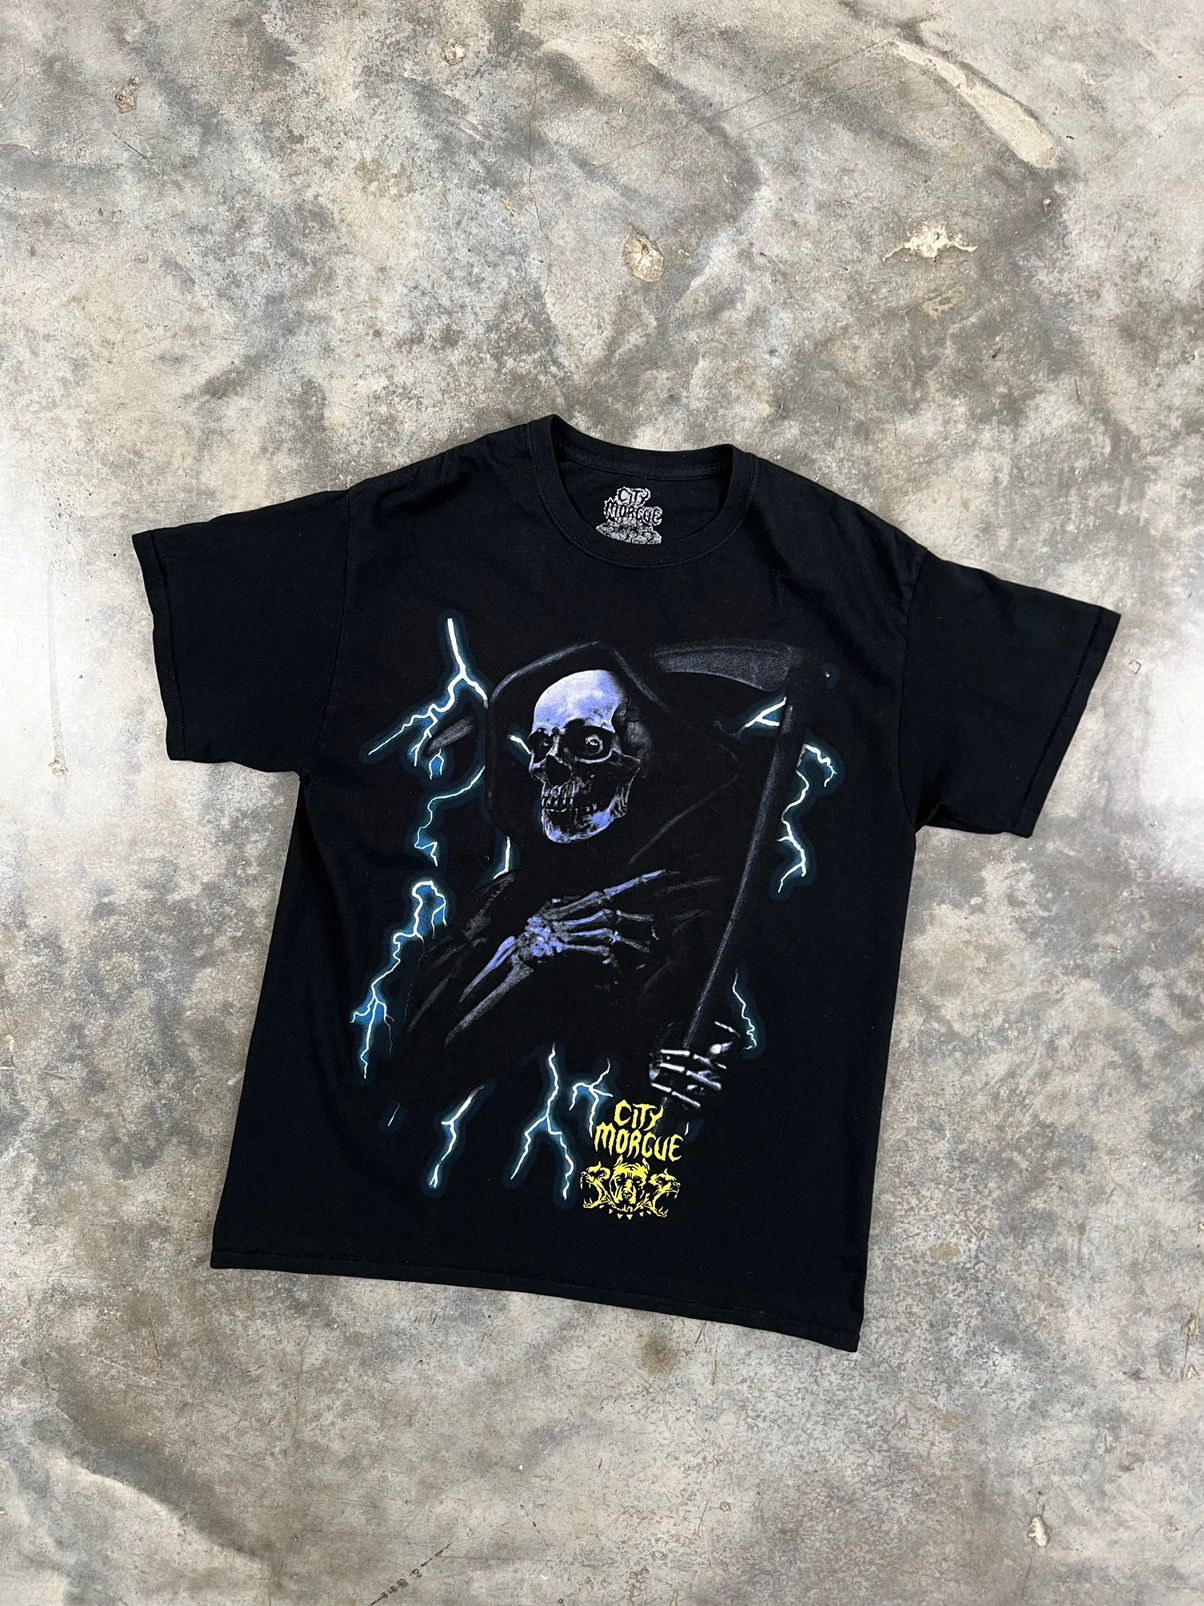 Pre-owned Streetwear City Morgue Lightning Thunder Reaper Tour Tee Black Large